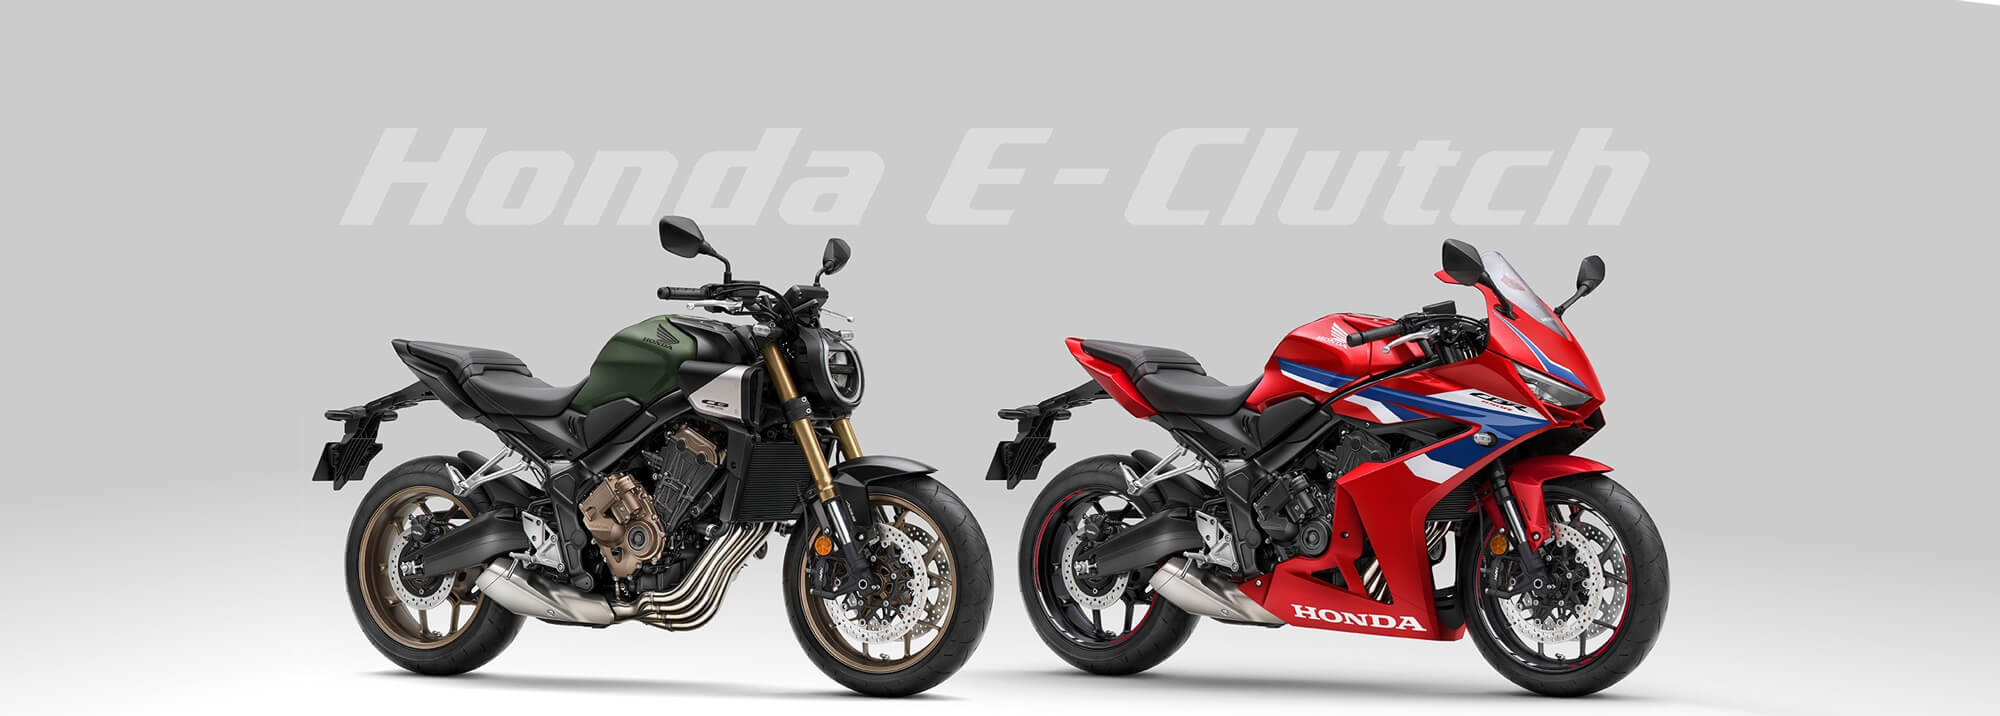 Honda previews first e-clutch for motorcycles video-banner